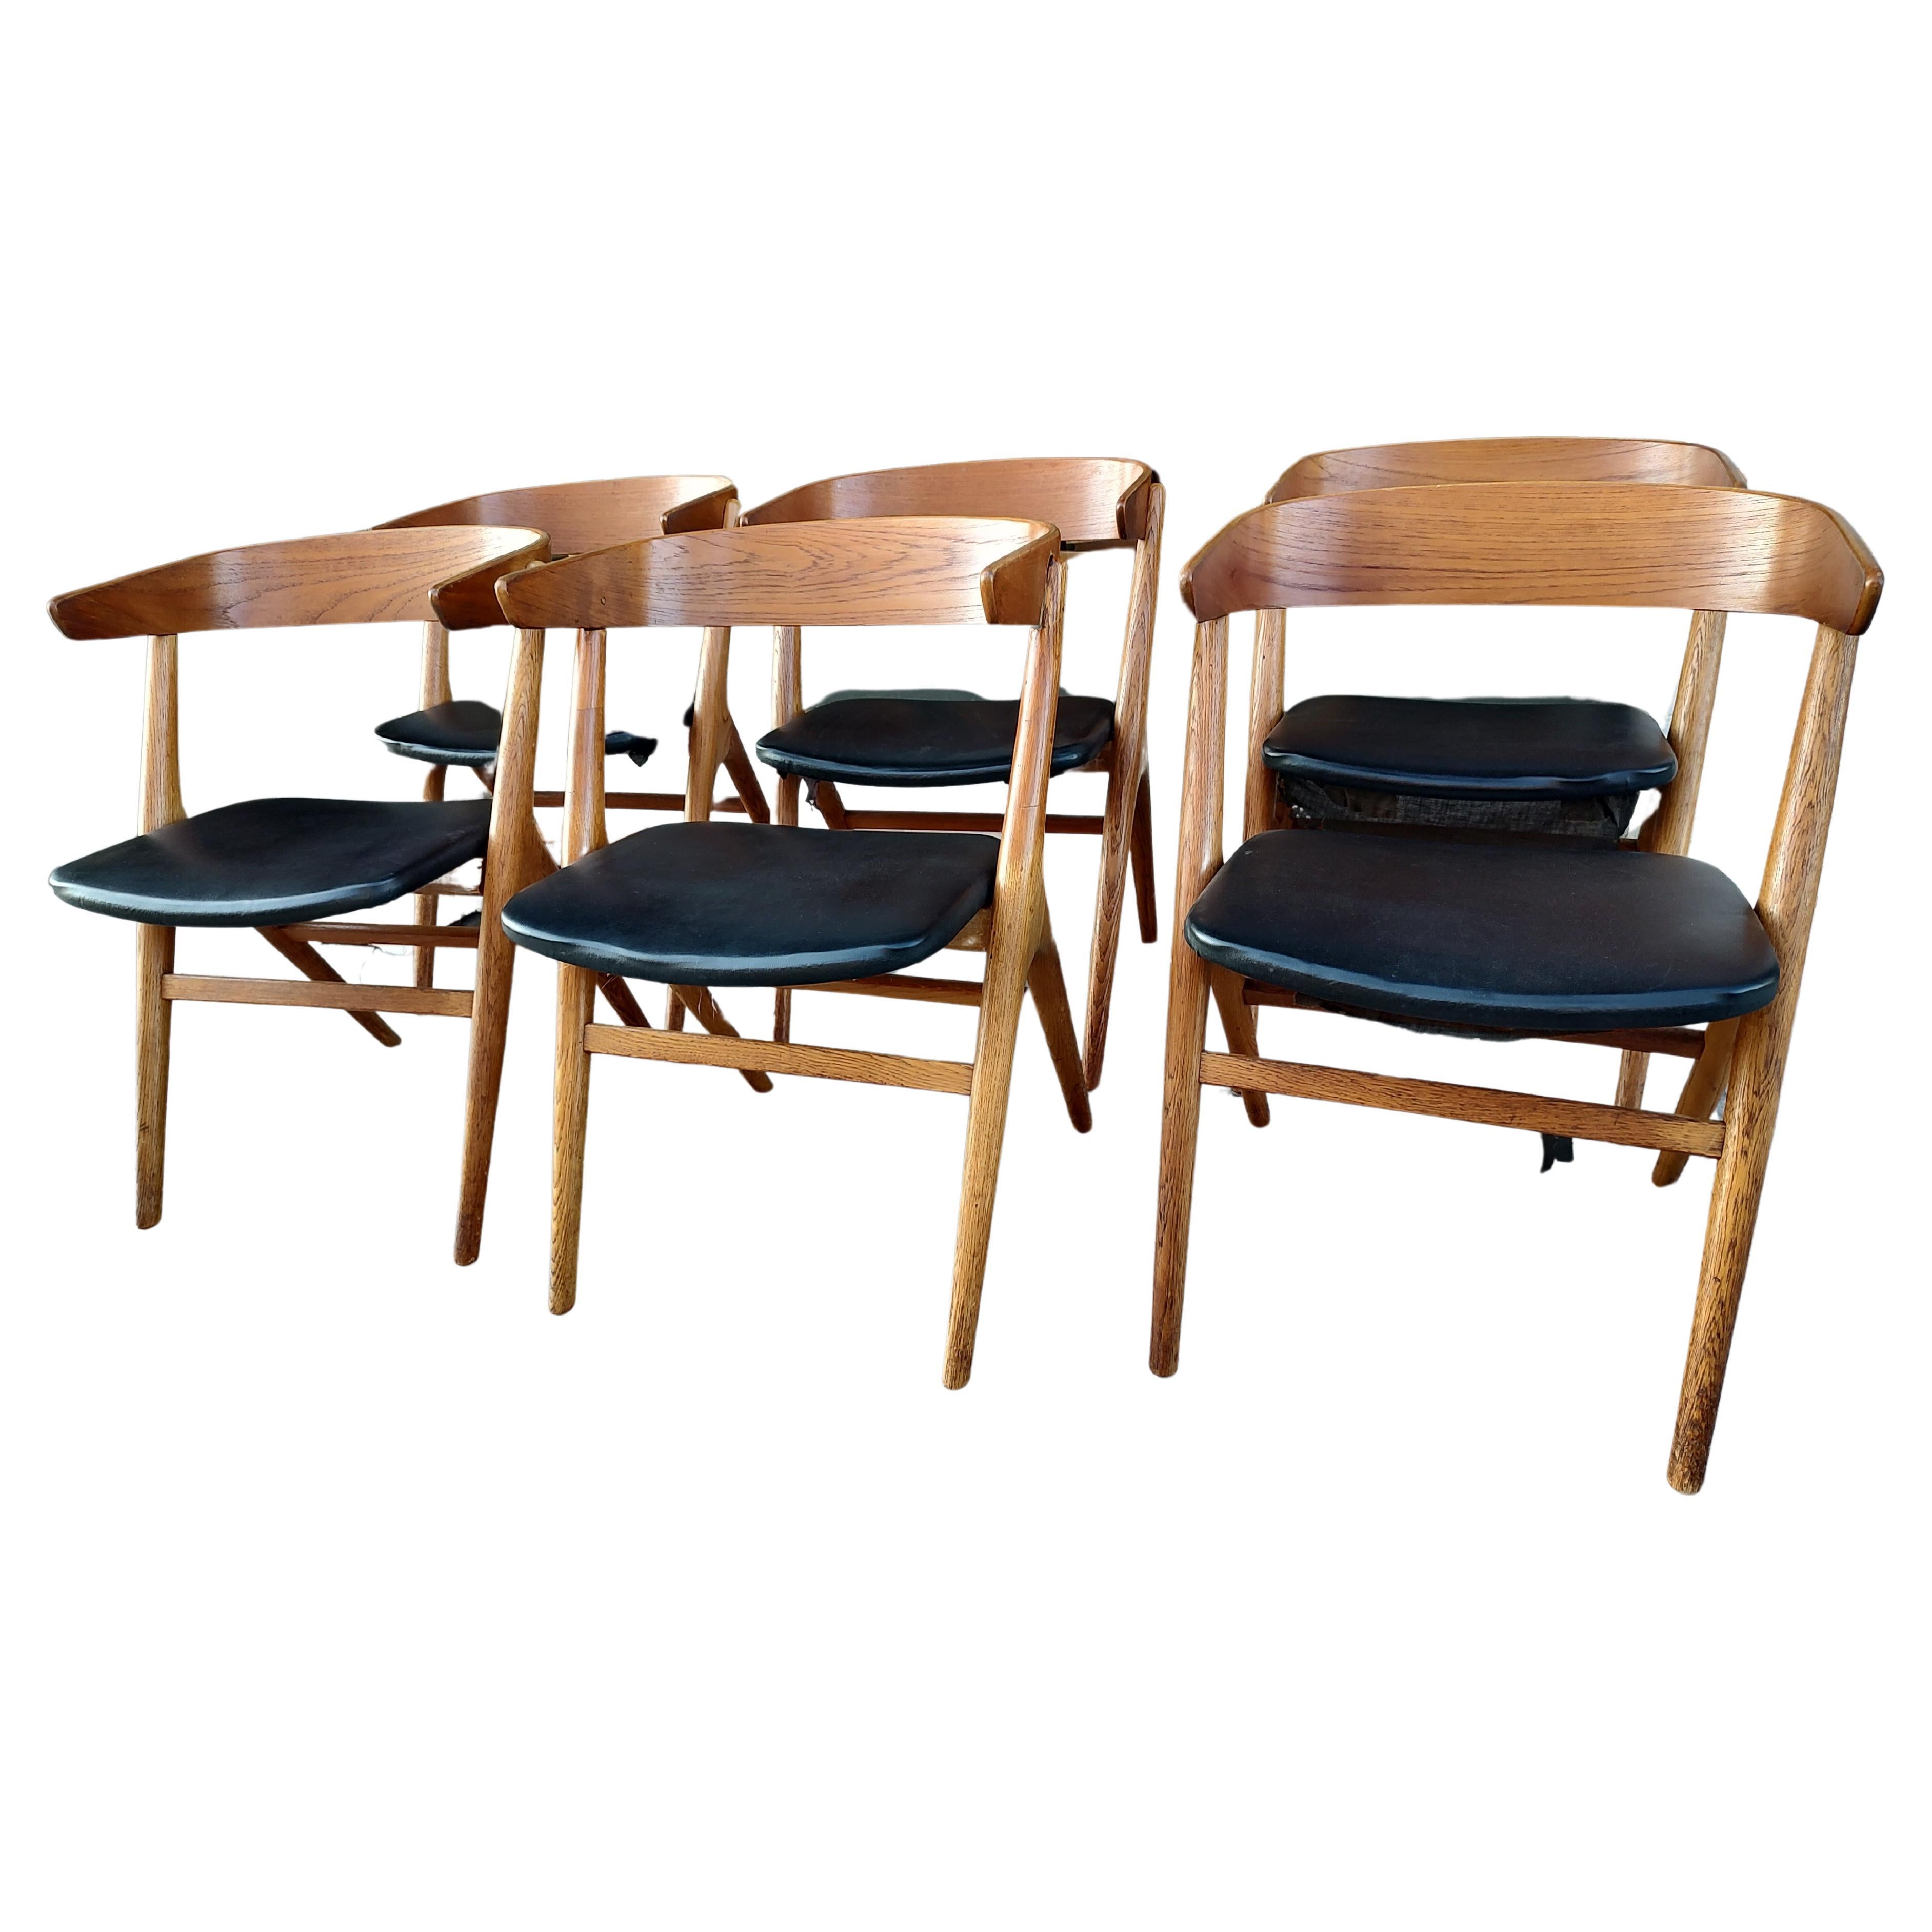 Set of Six Mid-Century Modern Danish Dining Chairs no. 9 by Helge Sibast For Sale 2